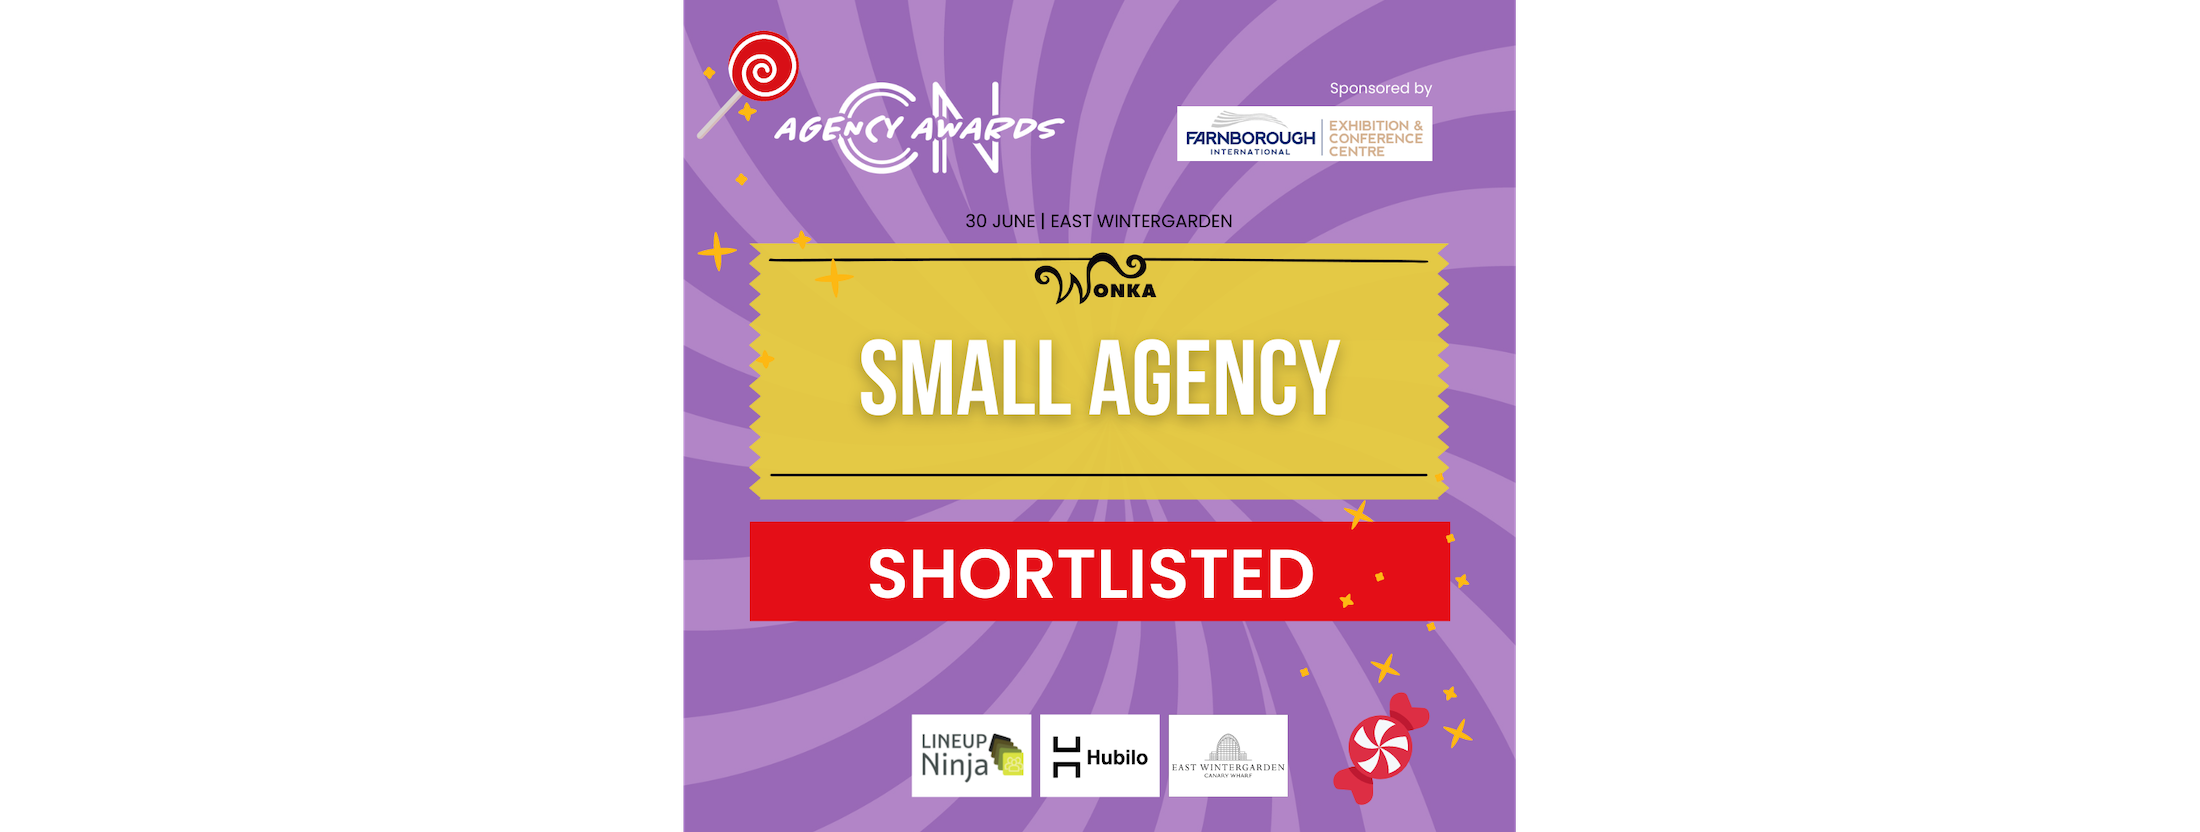 Small Agency_CNAA22Conference News Awards Small Agency of the Year 2022 edited